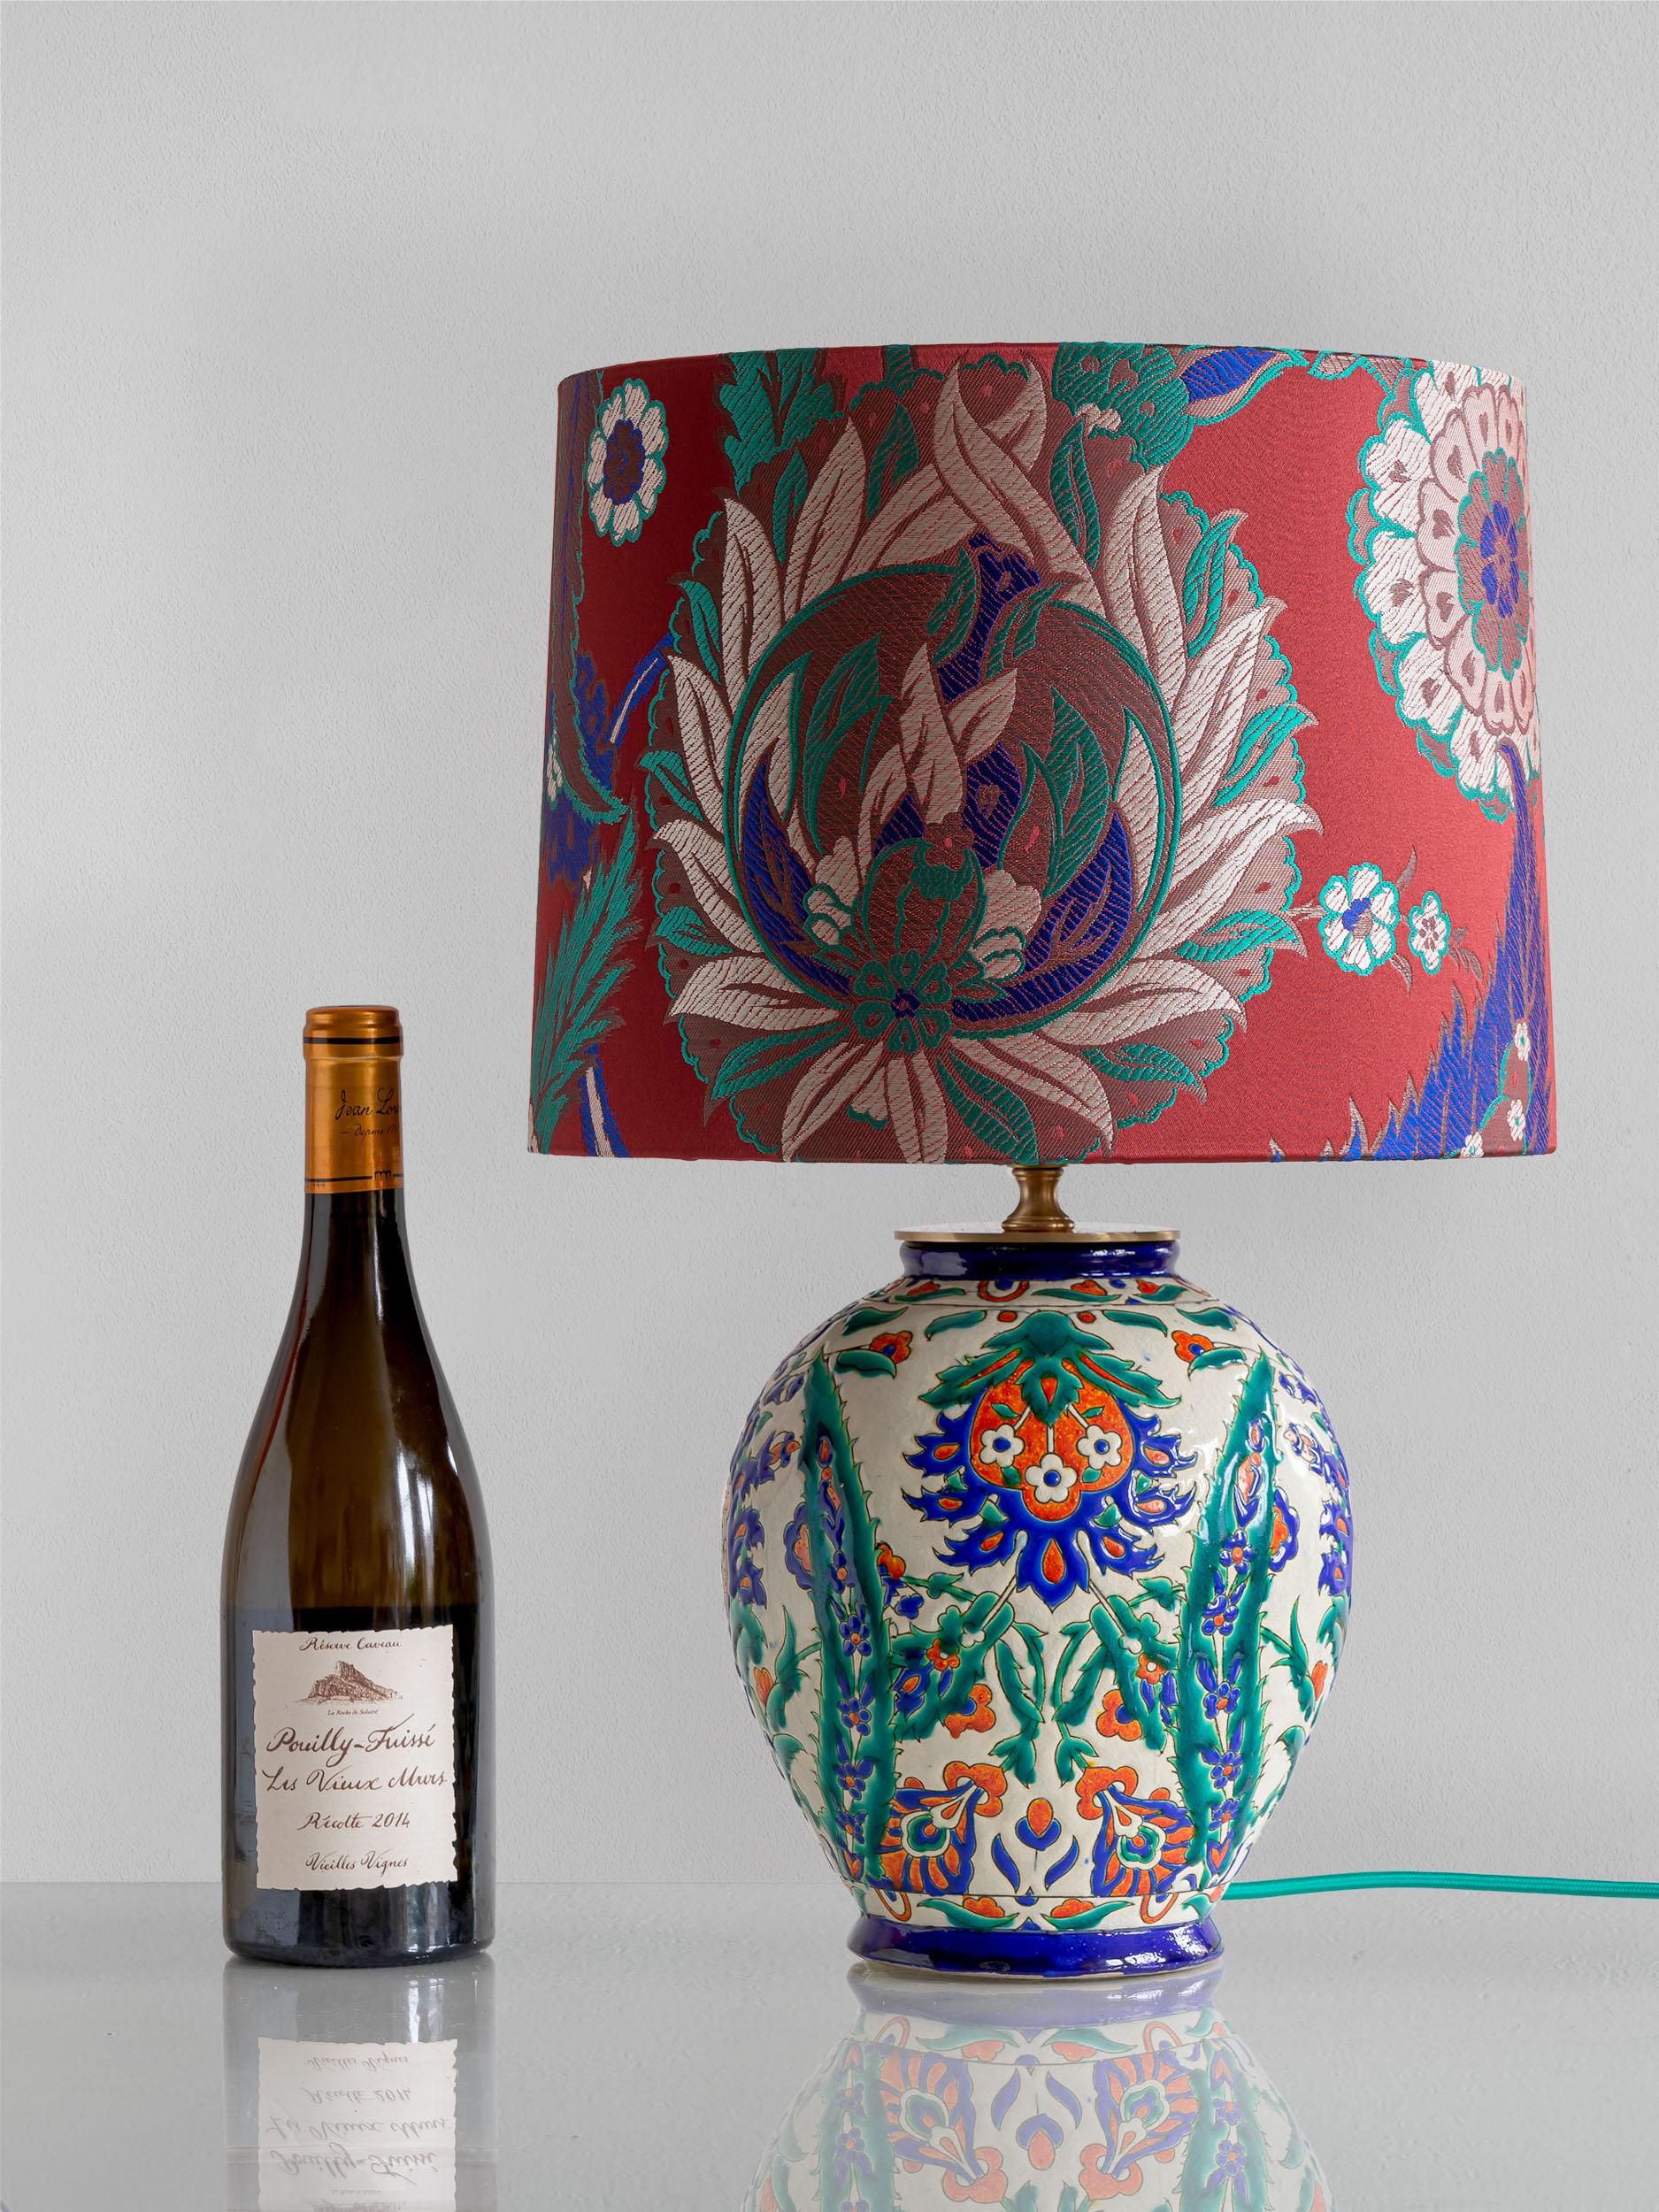 Introducing Askania, a unique table lamp crafted from an antique ceramic cloisonné vase designed by Raymond Chevallier. Originating from the Boch Frères Keramis in La Louvière, Belgium, this piece reflects the distinct 